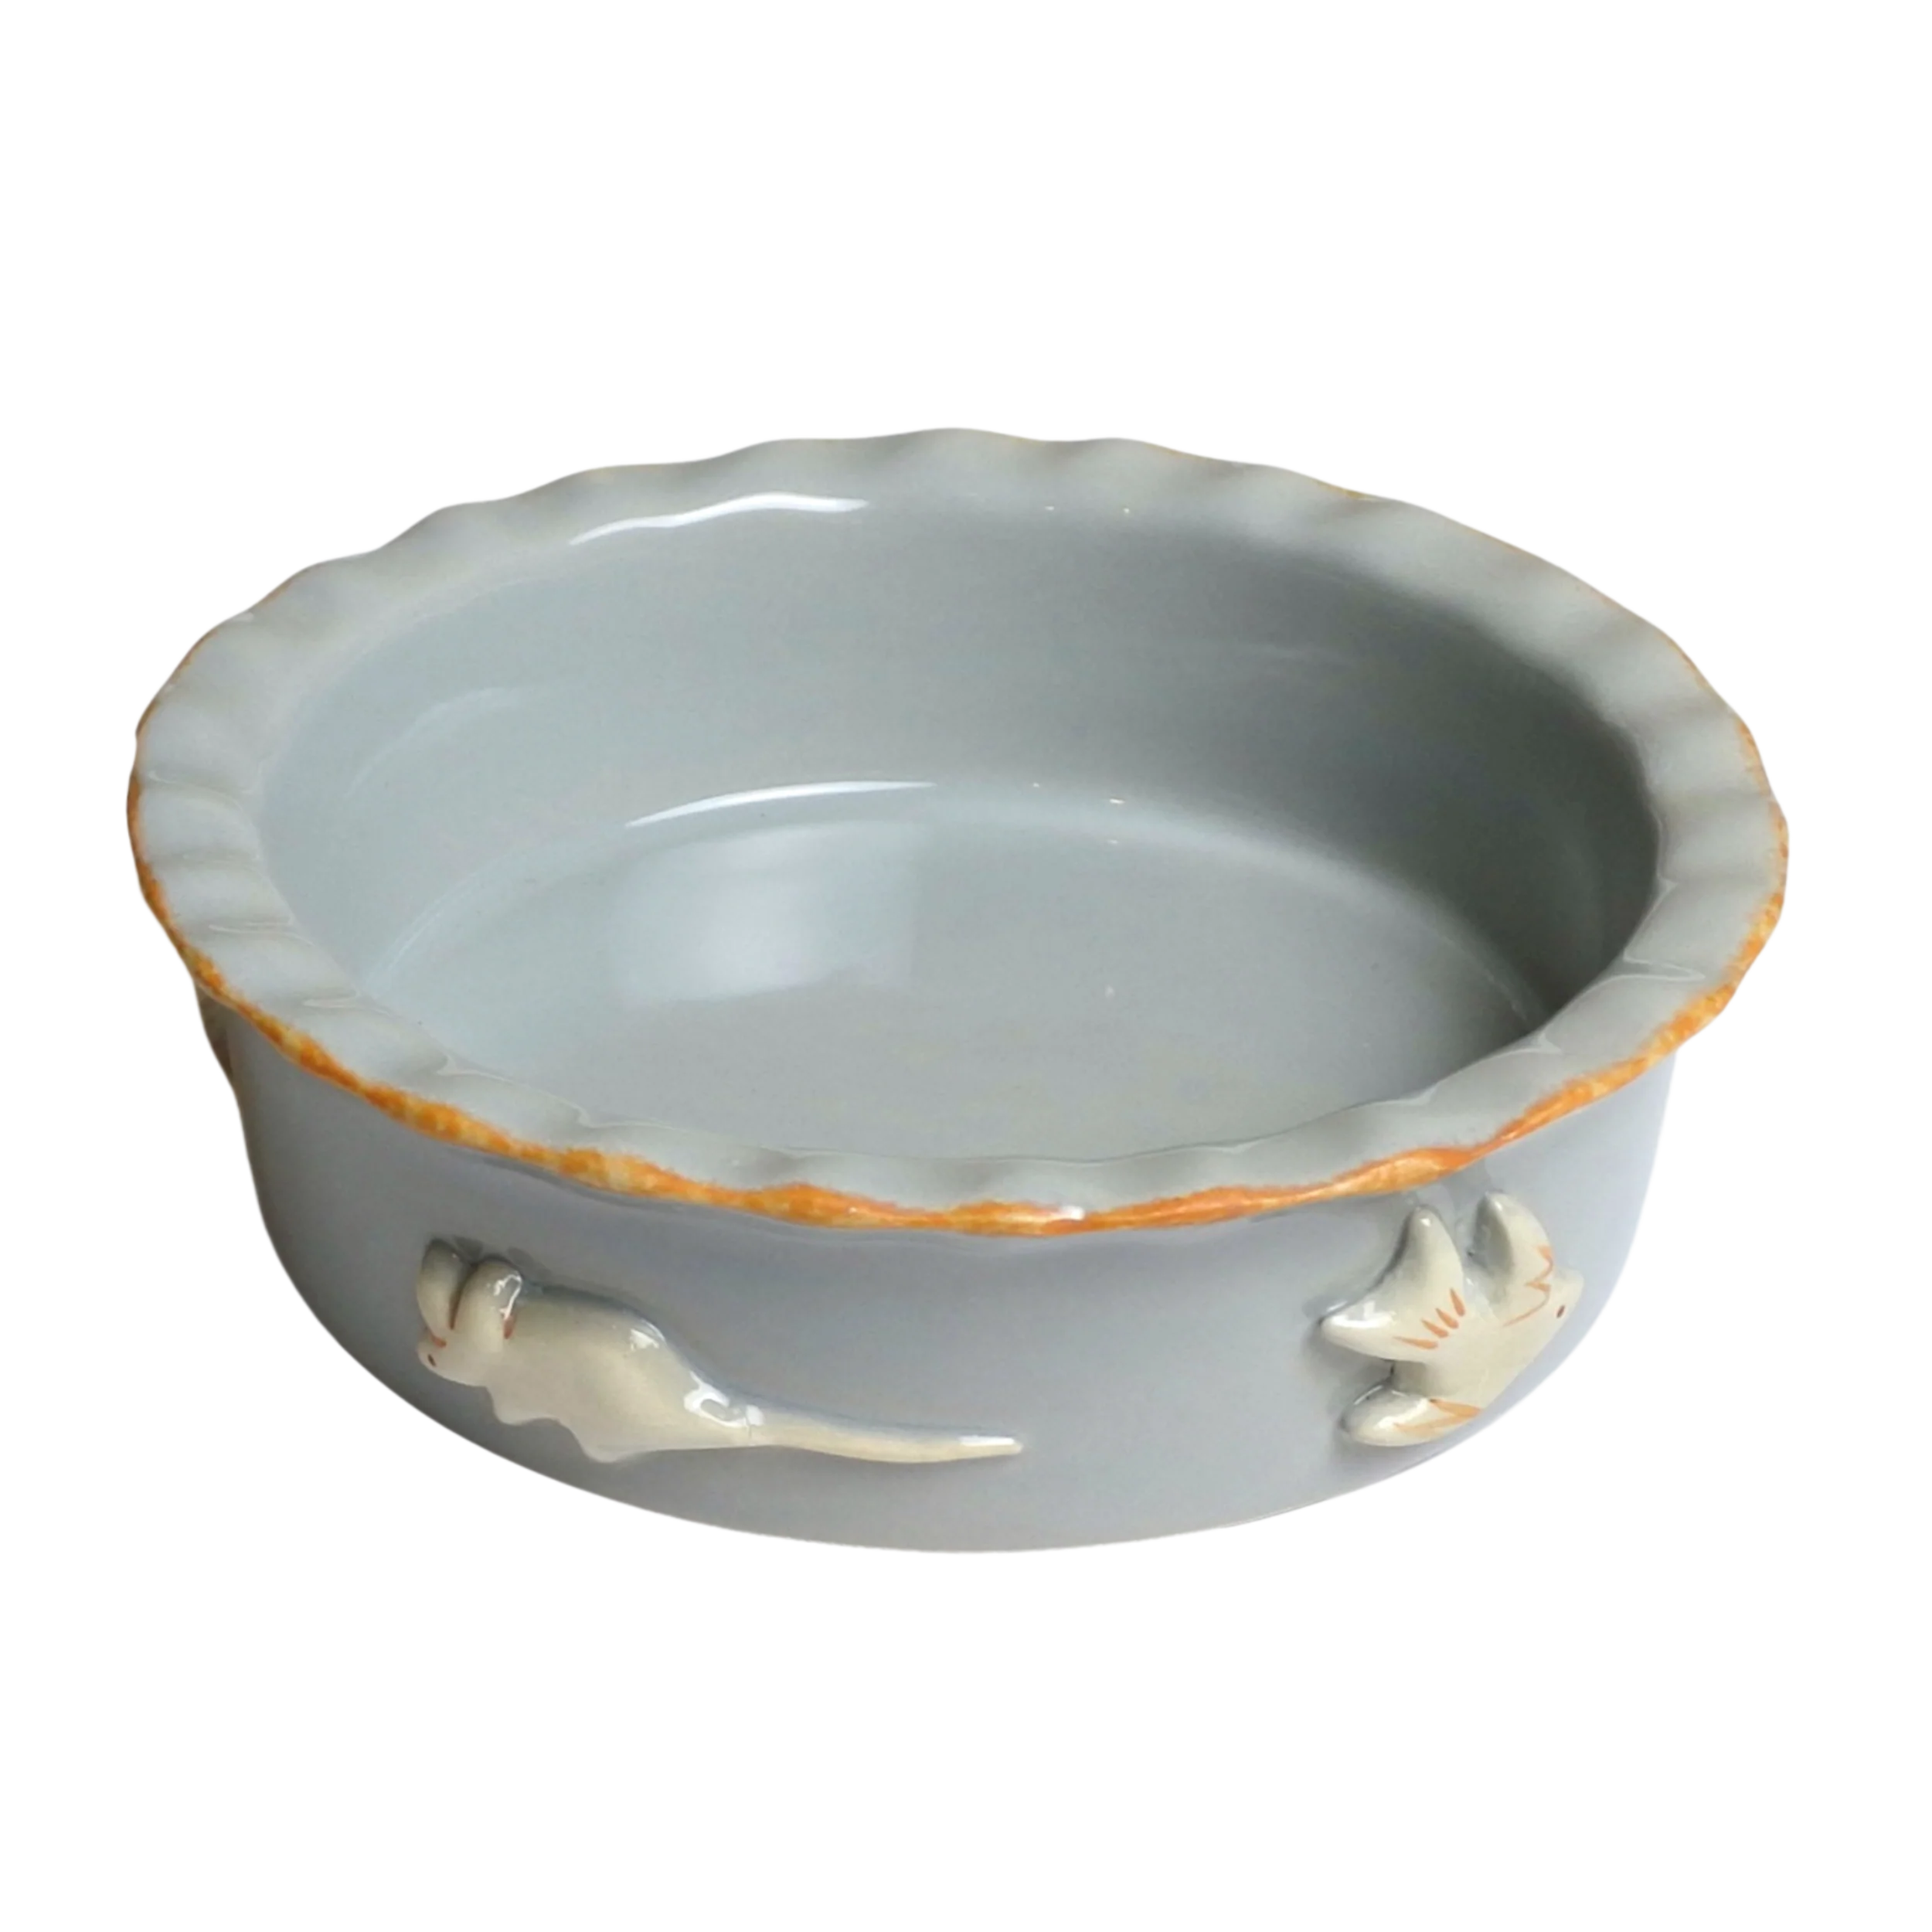 CAT-BOWL-FRENCH-GREY